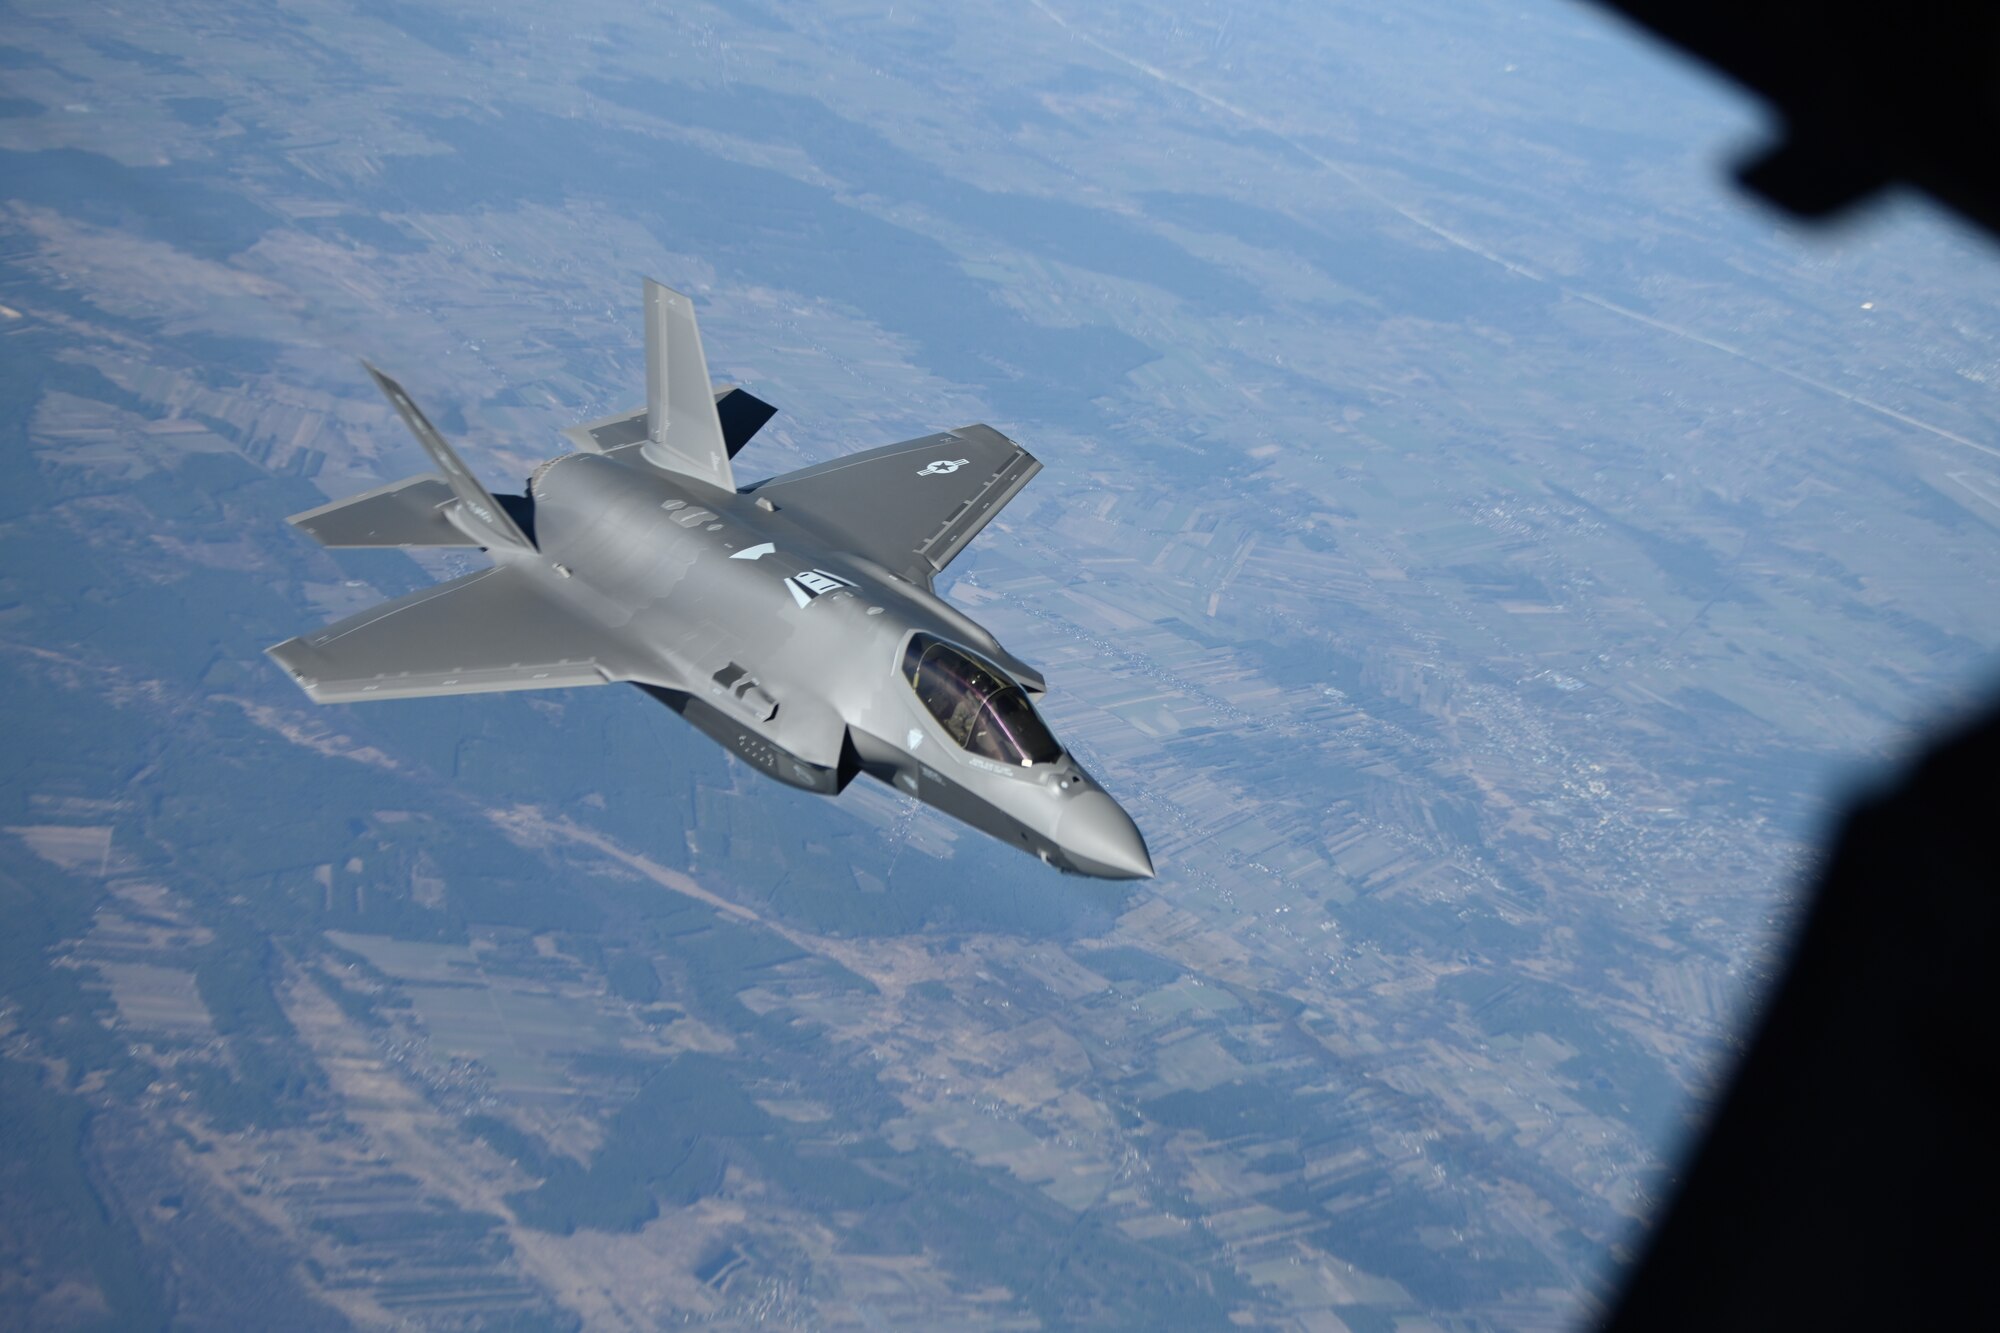 A U.S. Air Force F-35 Lightning II aircraft assigned to the 34th Fighter Squadron departs from a KC-10 Extender aircraft after receiving fuel over Poland, Feb. 24, 2022. U.S. Air Forces in Europe and Air Forces Africa’s ability to support and integrate with NATO’s air policing missions continually hardens the alliance’s solidarity, collective resolve, and ability to adapt to a dynamic war fighting environment. (U.S. Air Force photo by Senior Airman Joseph Barron)